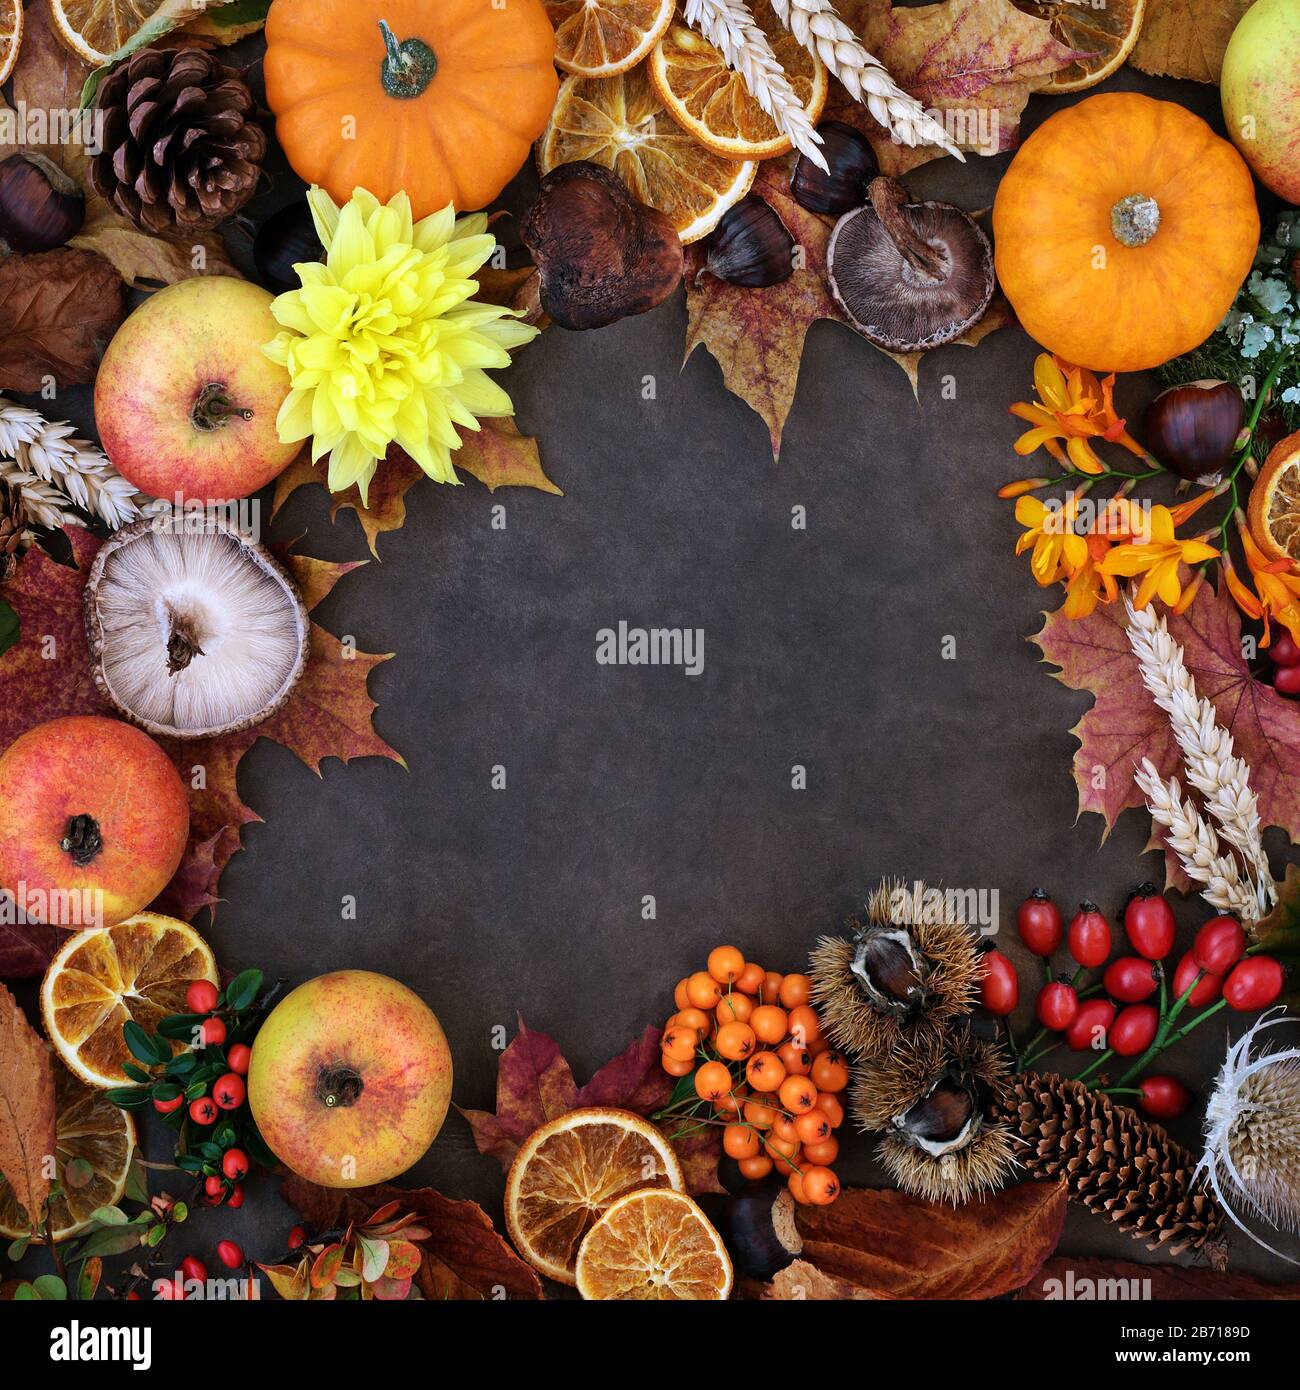 Autumn harvest festival background border with food, flora & fauna on lokta background. Top view, flat lay. Stock Photo